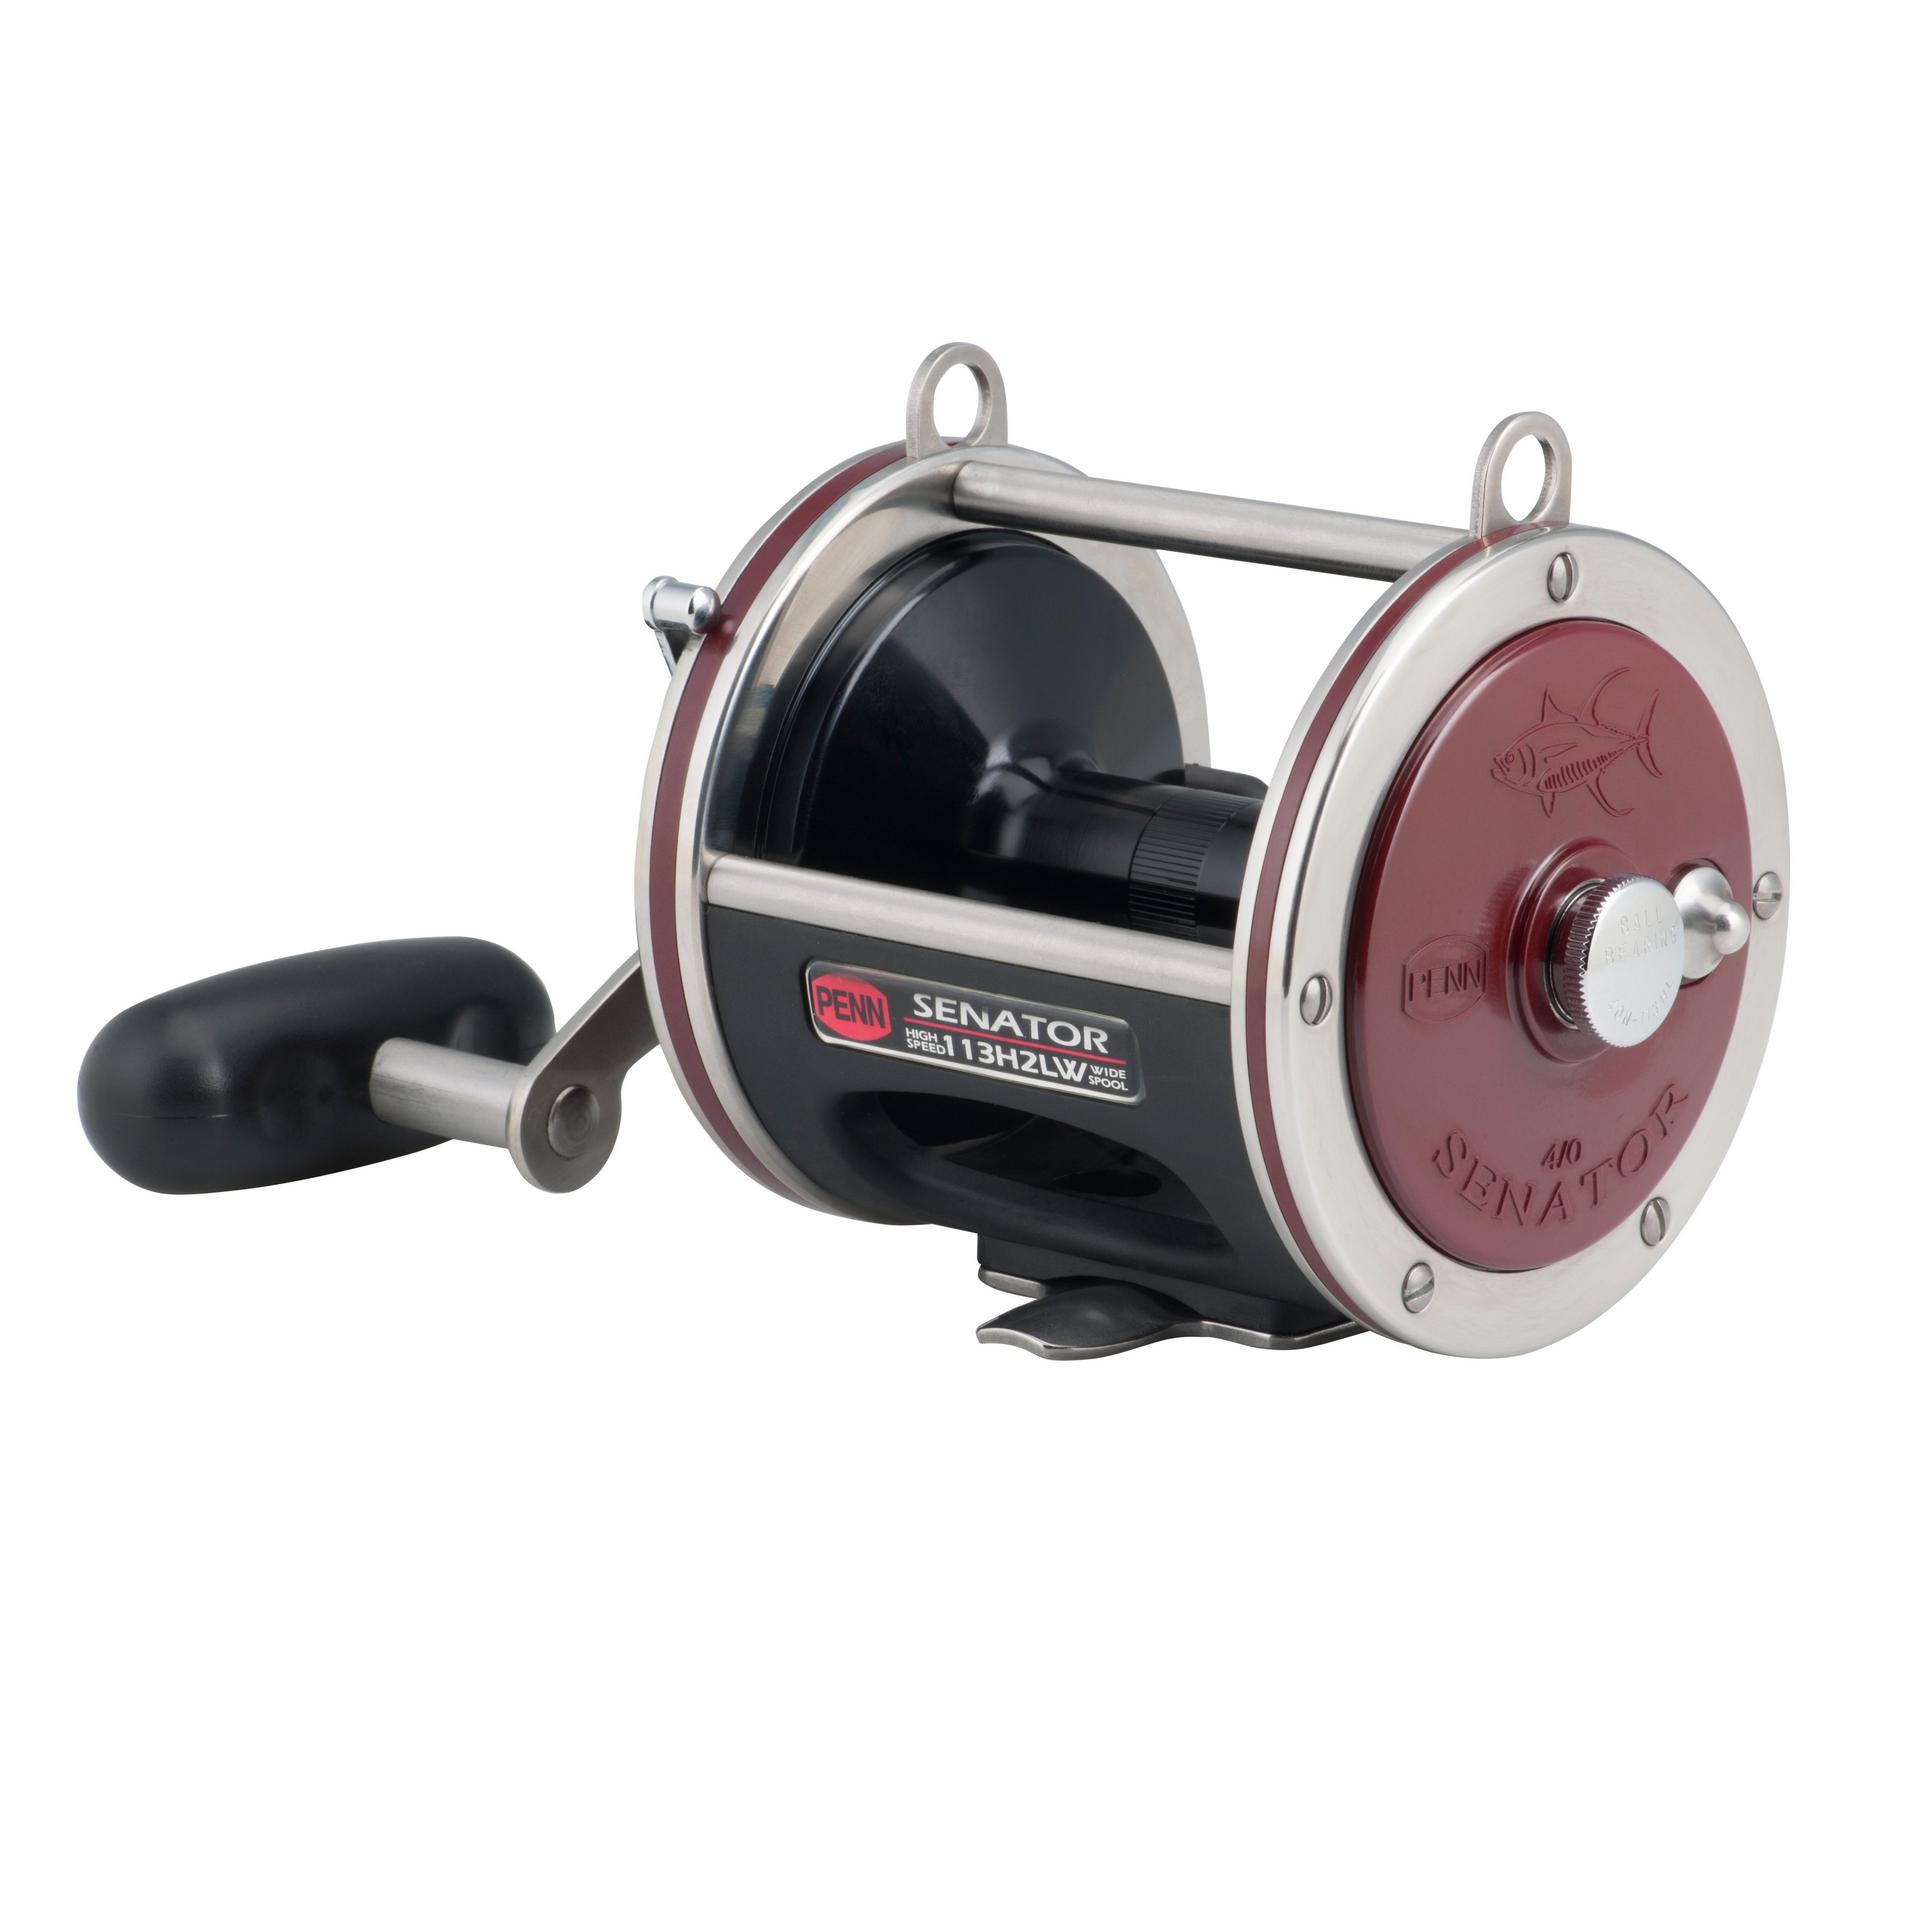 Penn 112H2 Special Senator Reel OEM Replacement Parts From